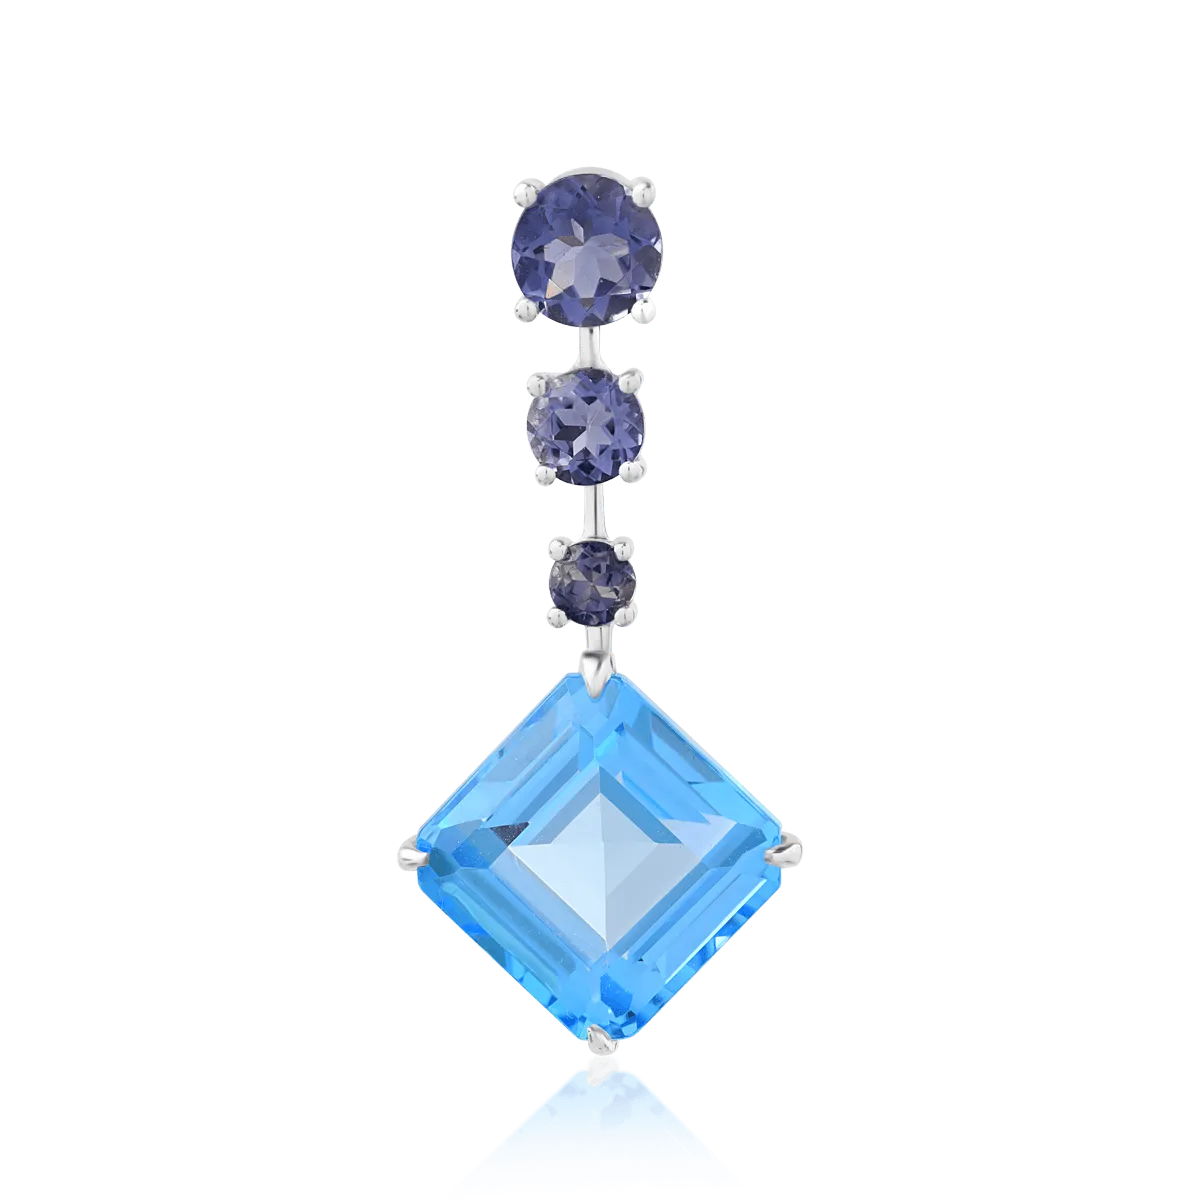 18K white gold pendant with 7.4ct blue topaz and 1ct iolite